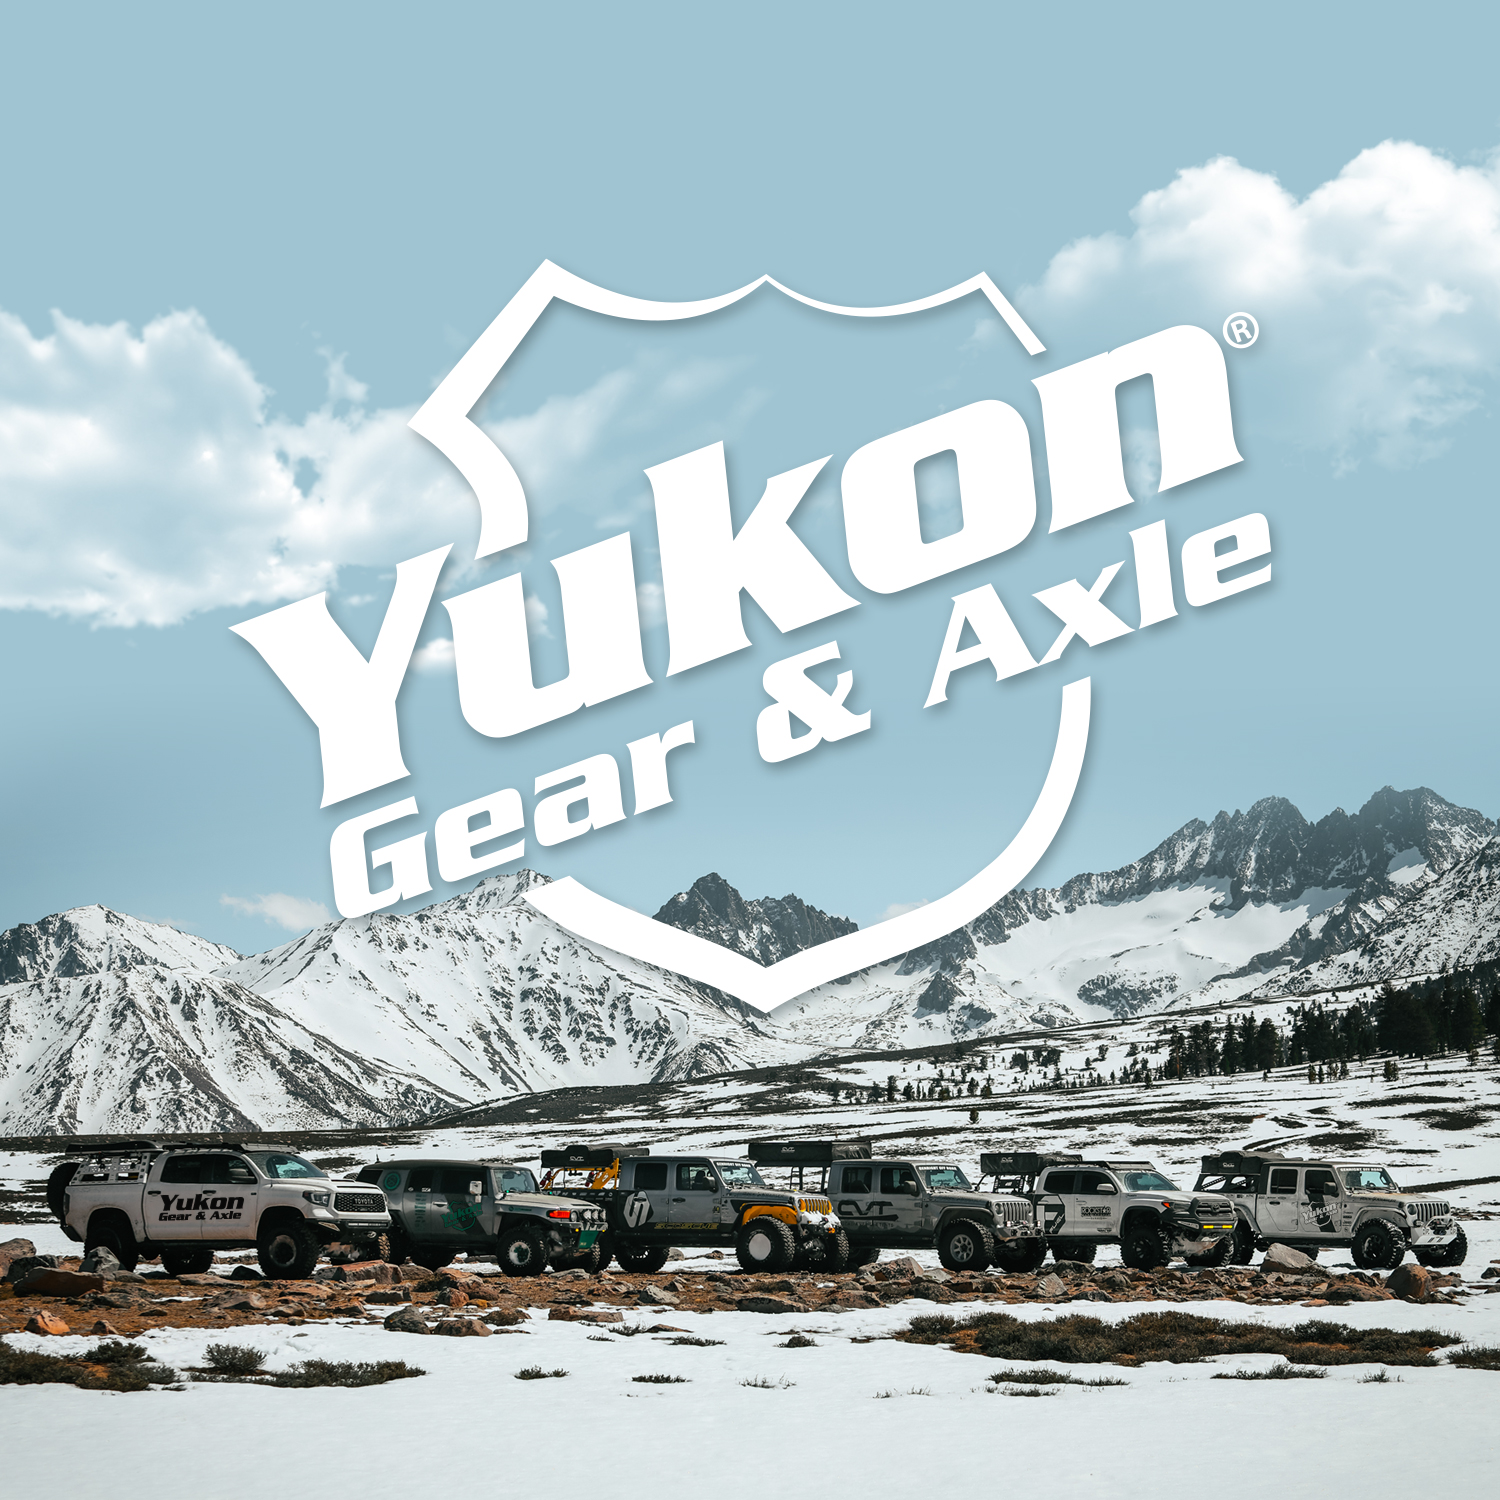 Yukon Re-Gear and Install Kit, D30 front/D44 rear, Jeep JL non-Rubicon, 4.11 